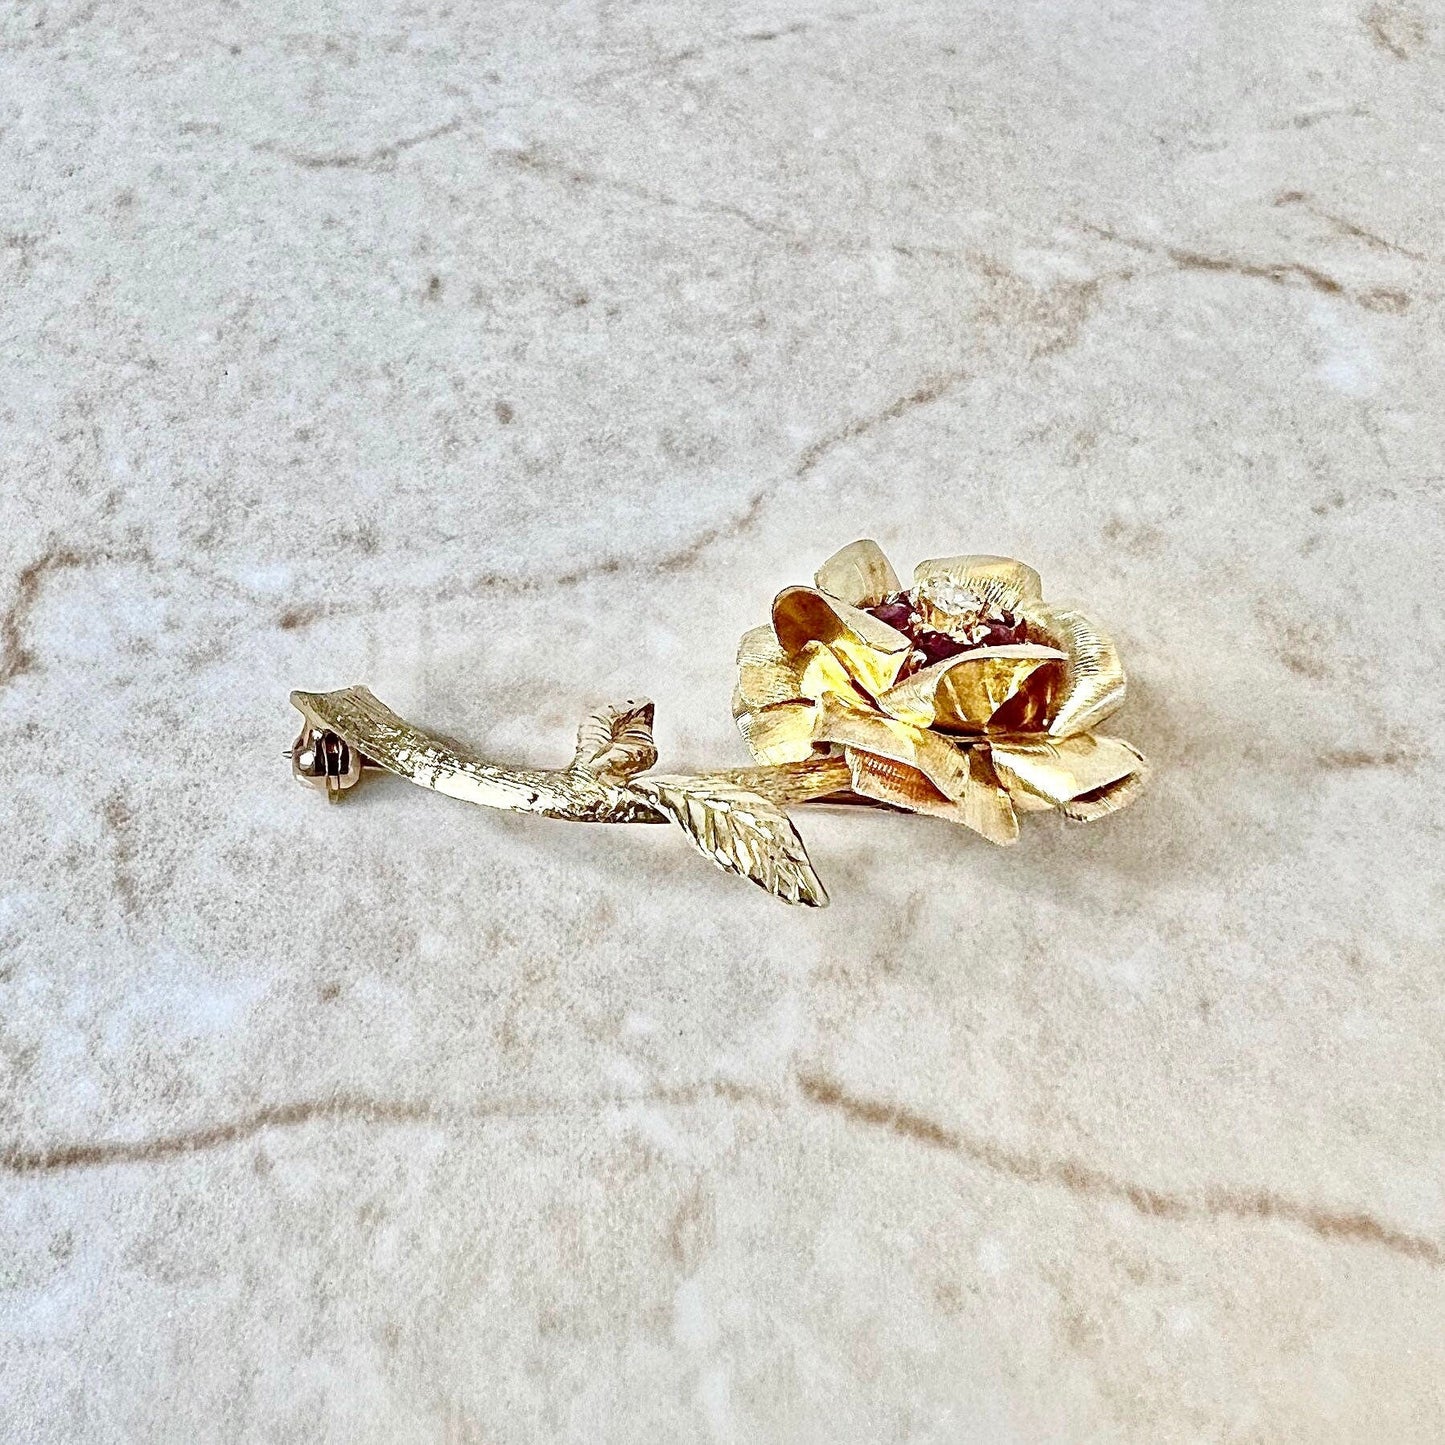 Vintage 1960’s 14K Diamond & Ruby Brooch - Yellow Gold Flower Brooch - Gold Ruby Pin - July Birthstone - Birthday Gift - Best Gift For Her